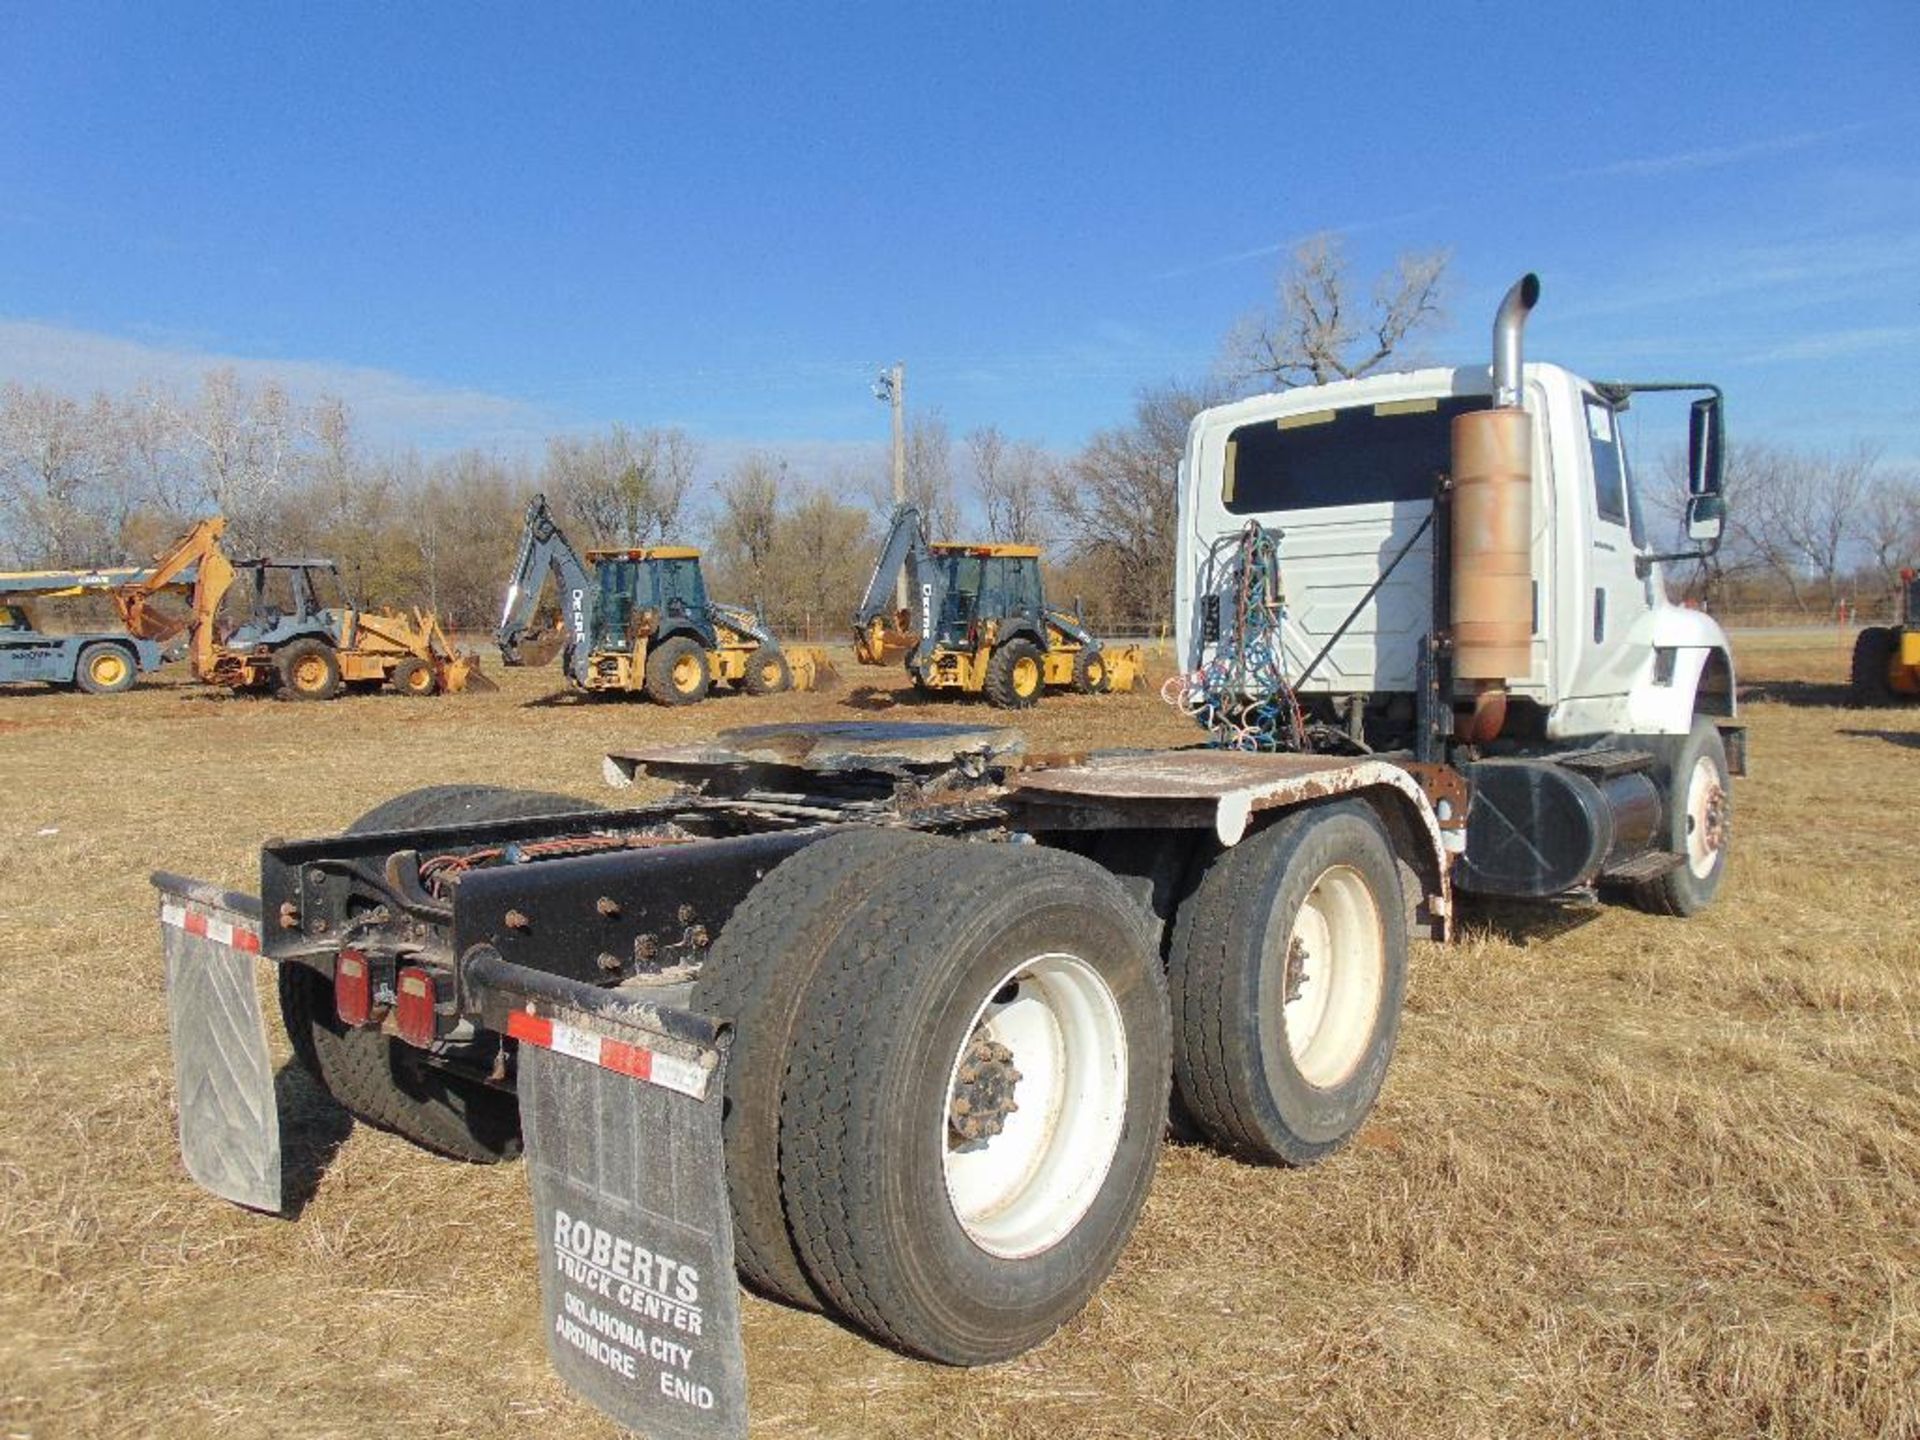 2005 IHC 7600 T/A Truck Tractor, s/n 1hswysbr065235647, cat c 13 eng, 10 spd trans, od reads 209294 - Image 7 of 10